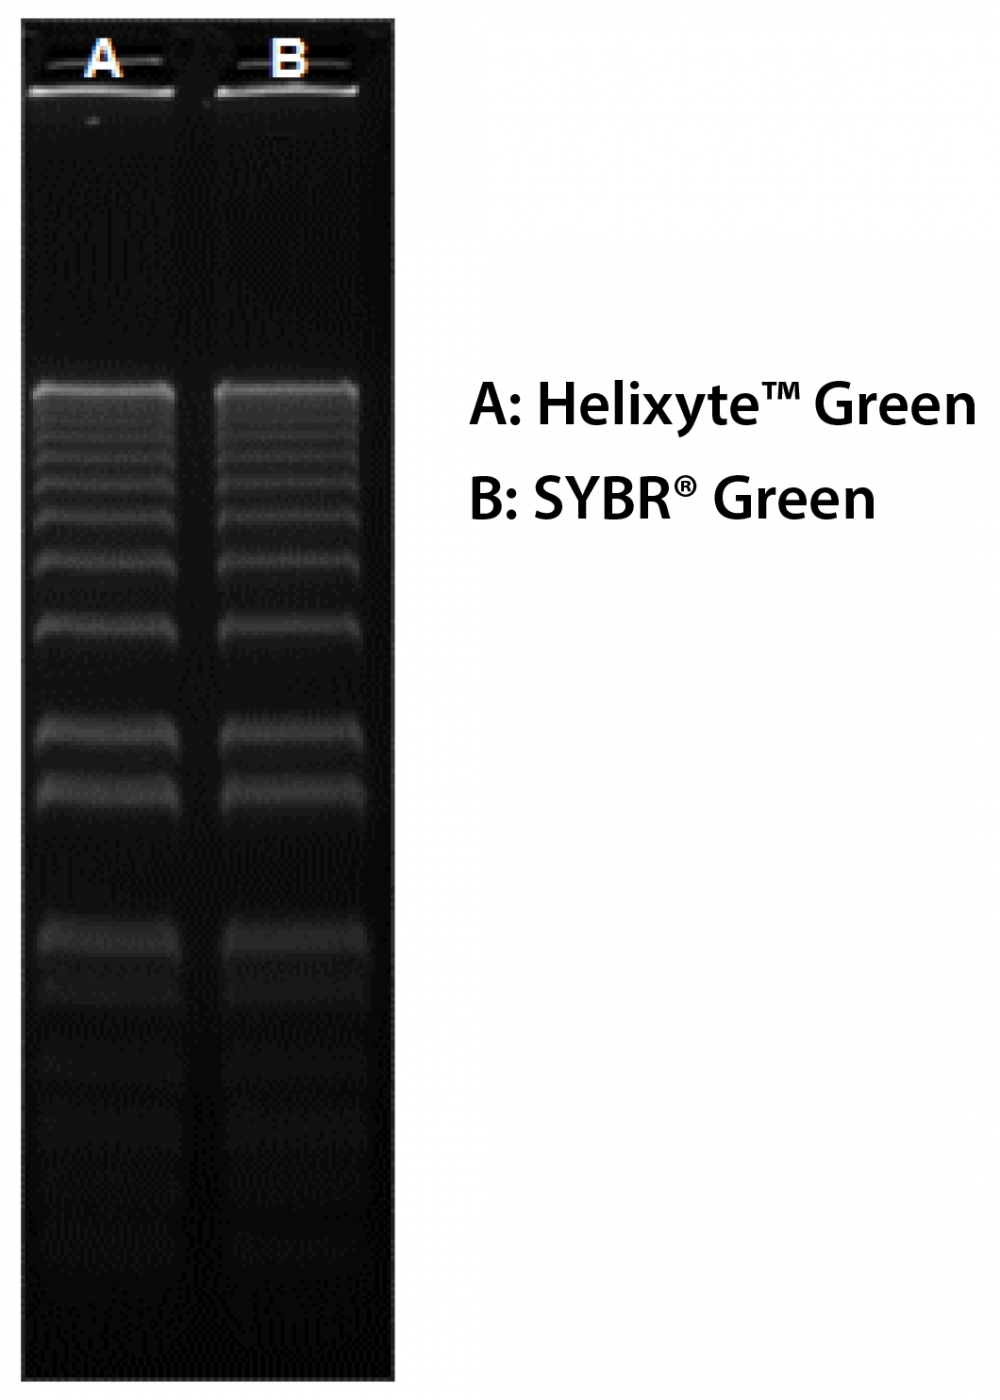 160 ng of 1 Kb Plus DNA Ladder (ThermoFisher 10787018) in 0.9% agarose/TBE electrophoresis gel were stained with Helixyte&trade; Green and SYBR&reg; Green and imaged with 254-nm UV transilluminator using UVP Bioimaging System.